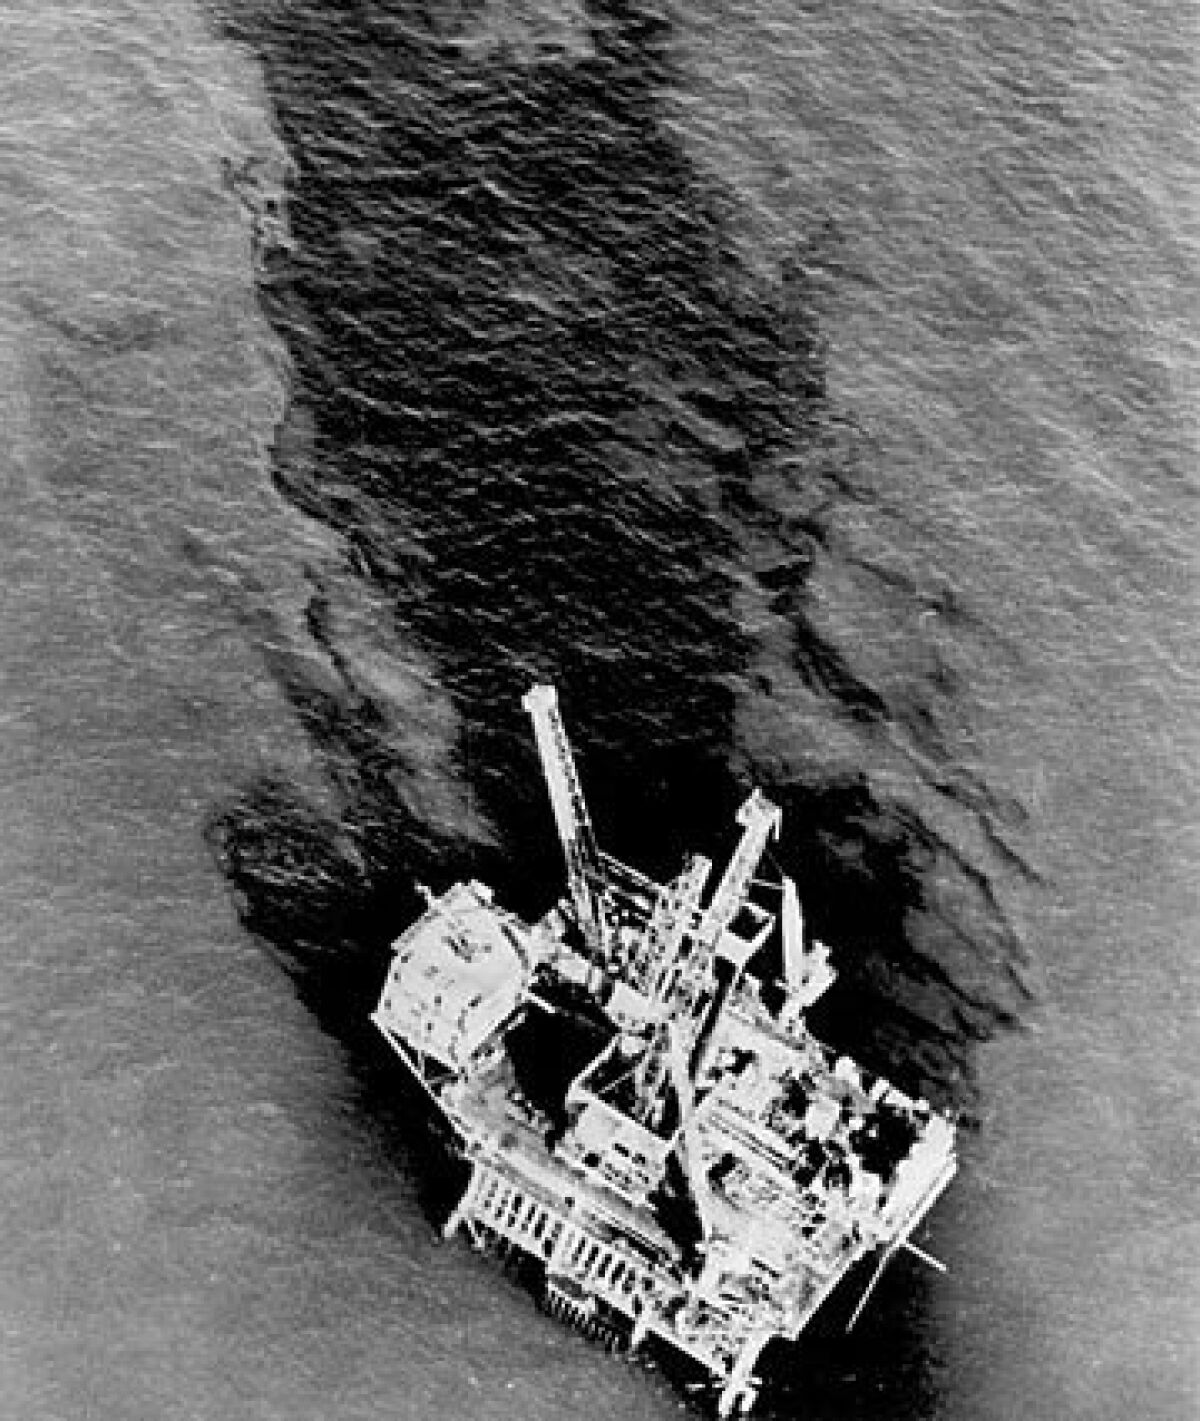 In the winter of 1969, 3 million gallons of oil began leaking from an offshore drilling site off the Santa Barbara coast. It would eventually be contained, but the incident helped spark landmark environmental legislation to protect the nation's waters and air. (Los Angeles Times )